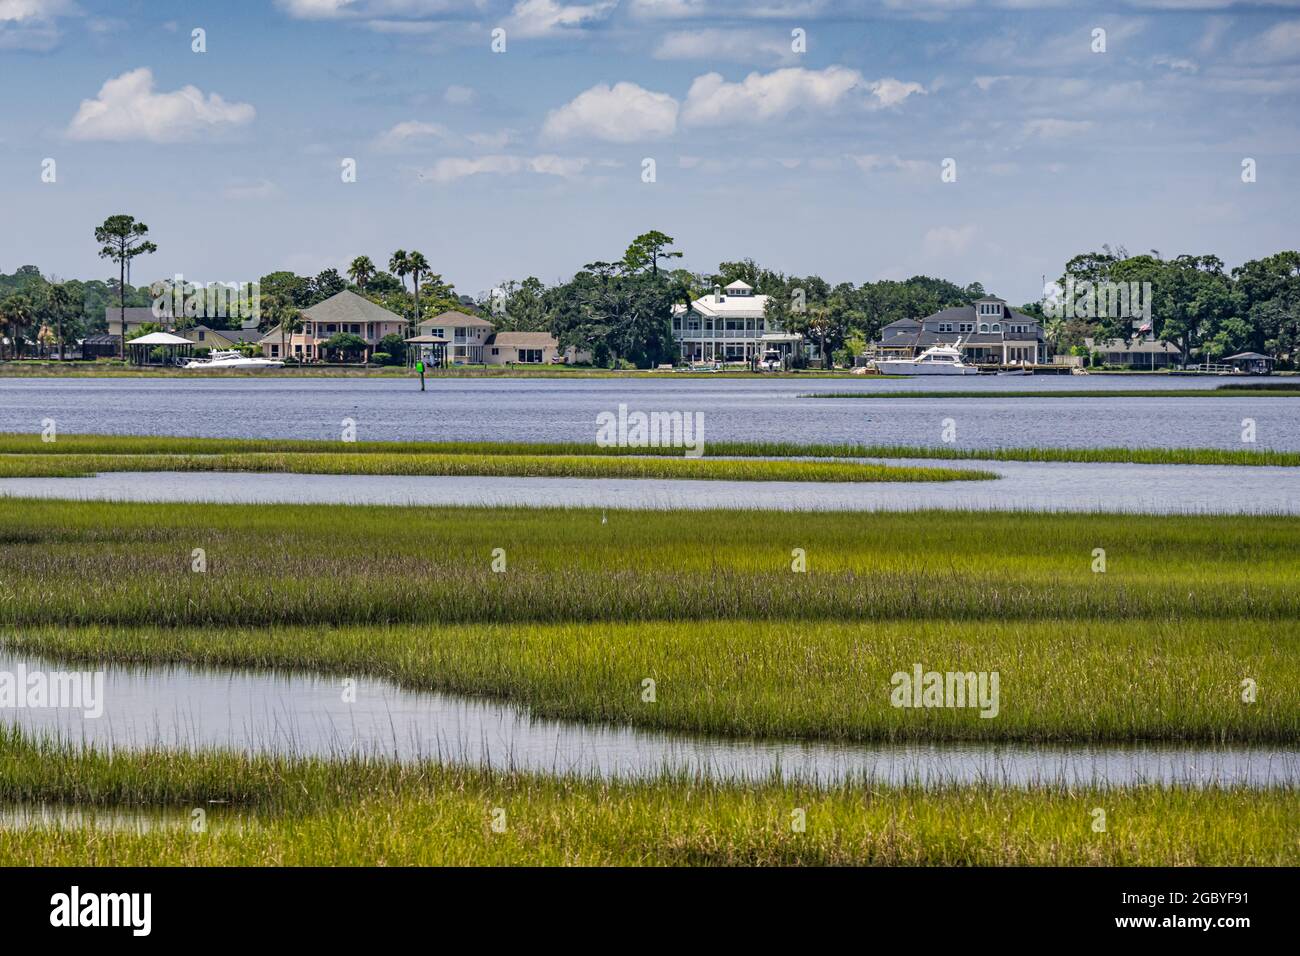 Waterfront homes on the Intracoastal Waterway in Jacksonville, Florida. (USA) Stock Photo